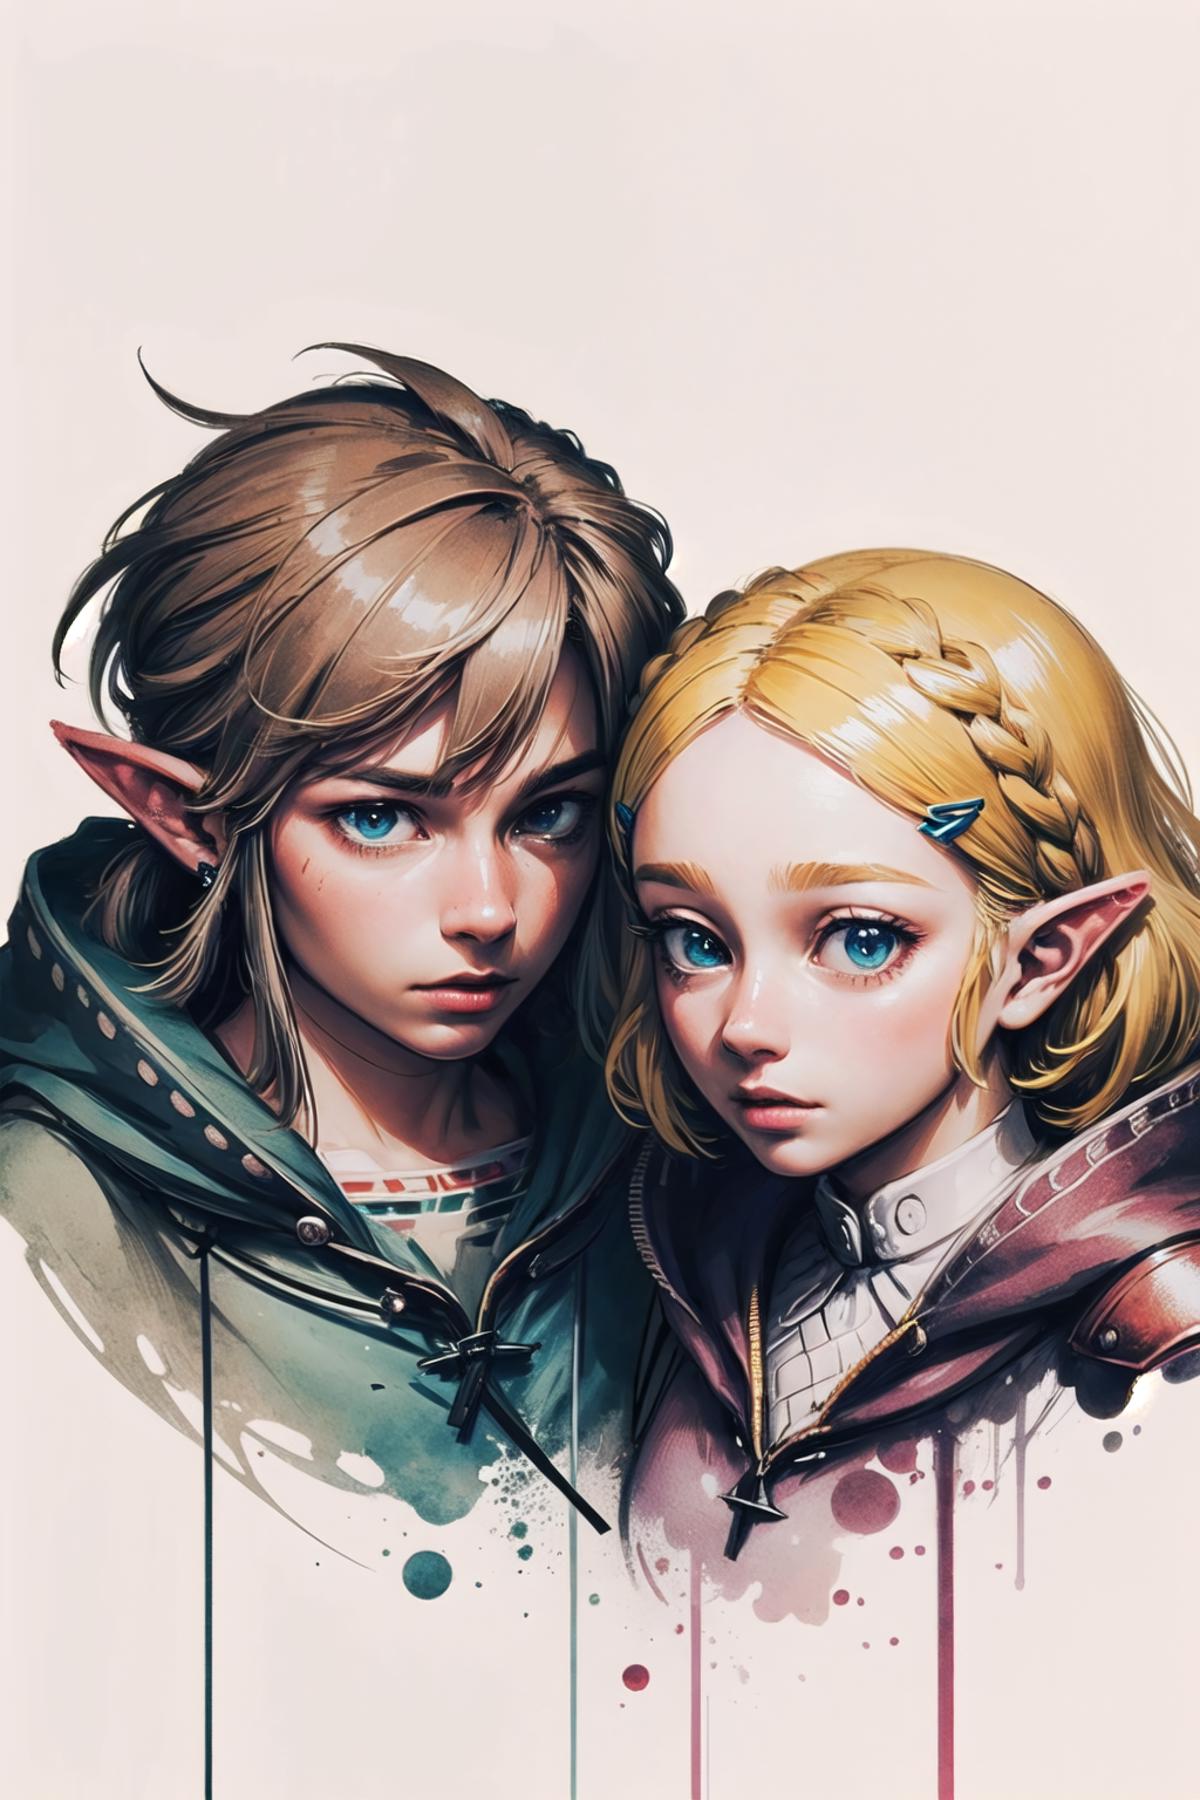 link x zelda in 1 pic 林克 x 塞尔达 双人同图 image by wrench1815